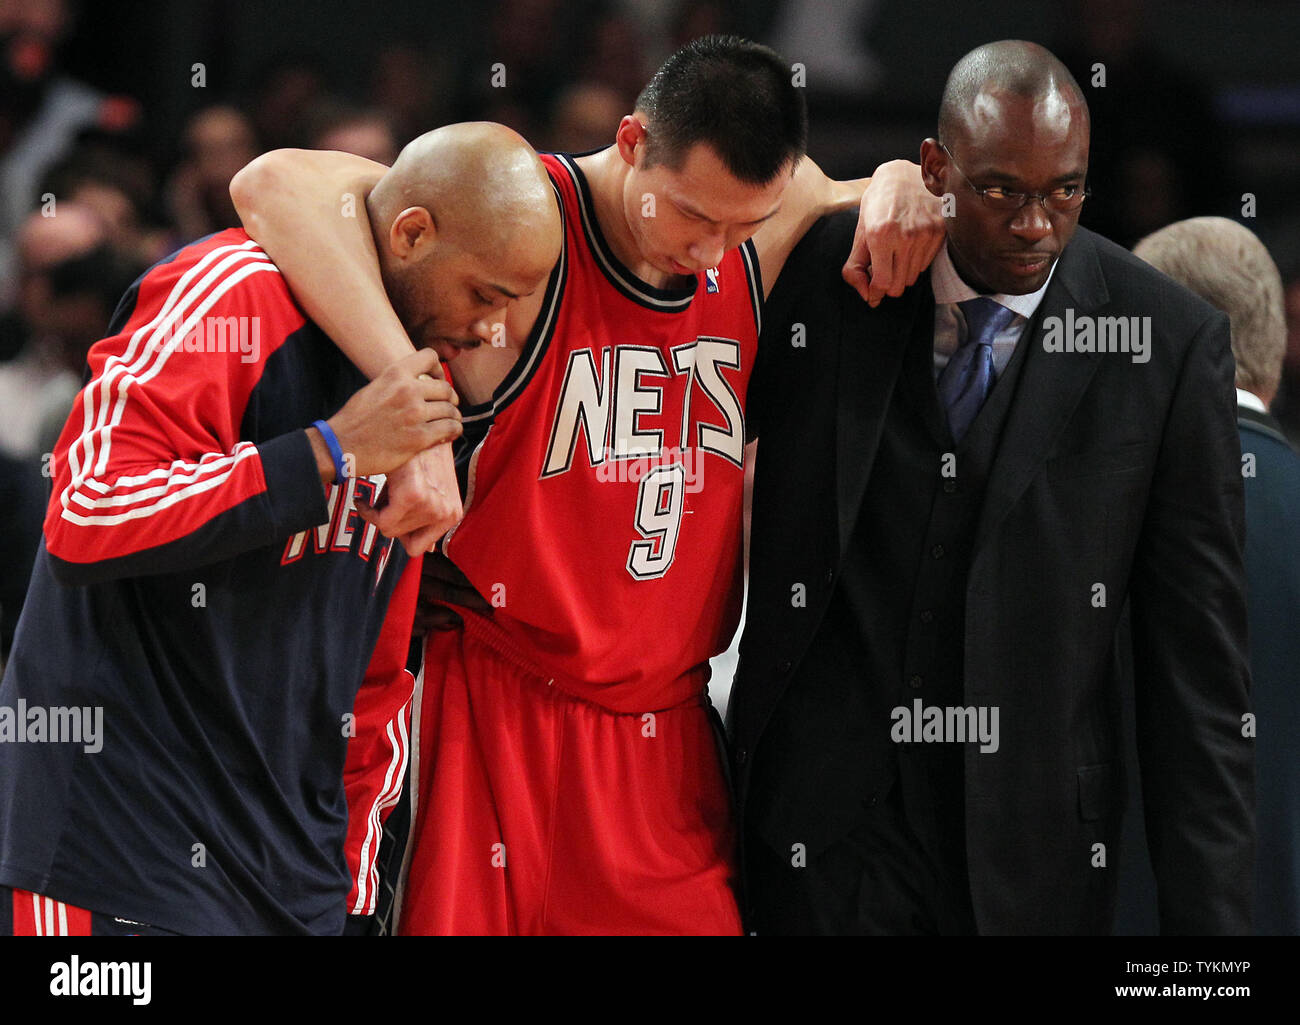 Nj nets hi-res stock photography and images - Alamy